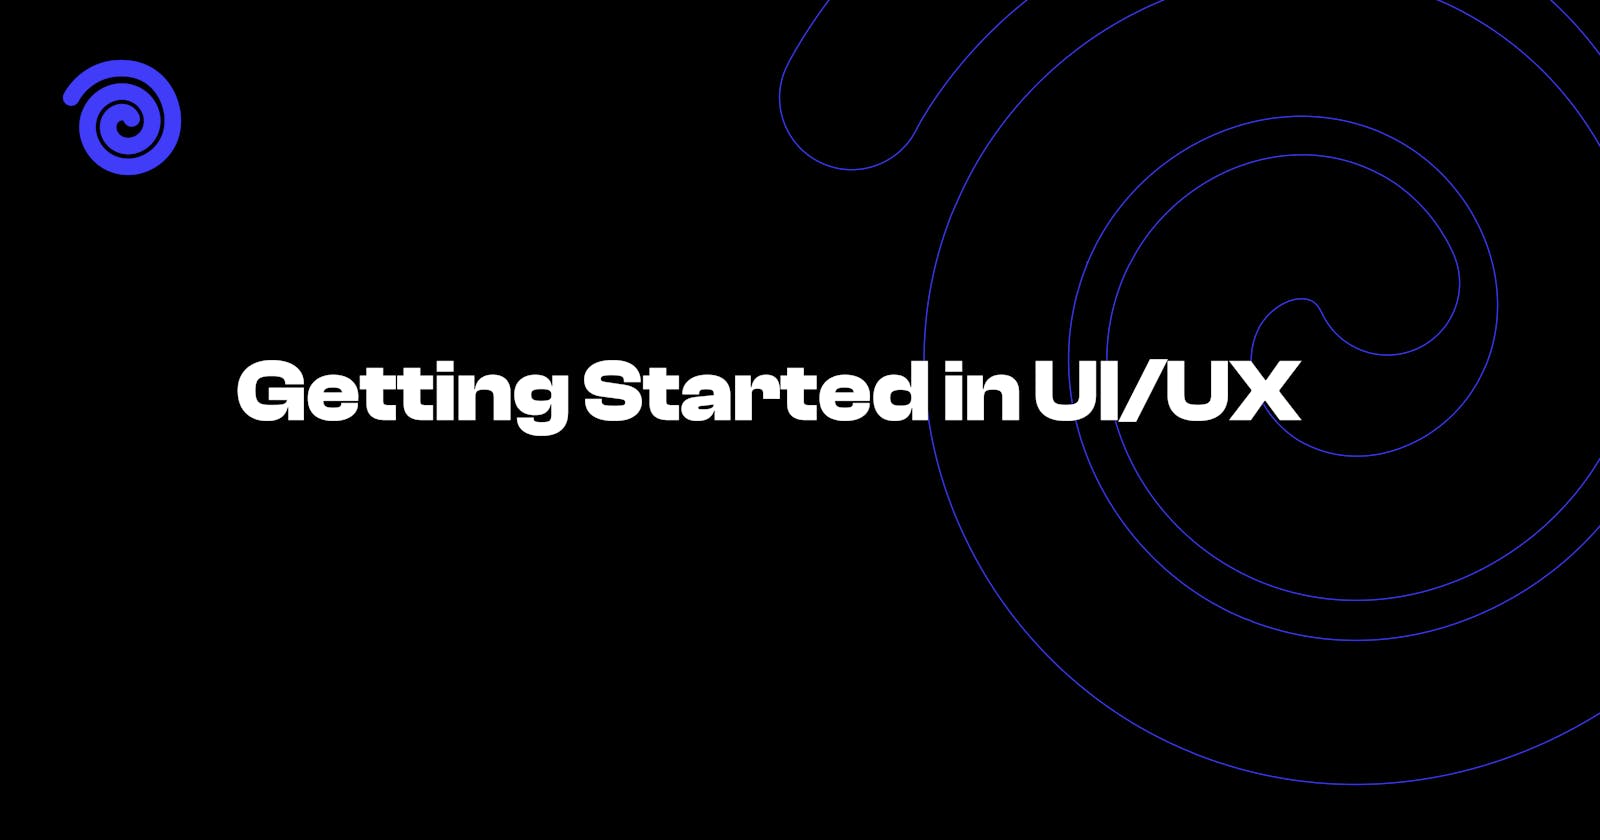 Getting Started in UI/UX